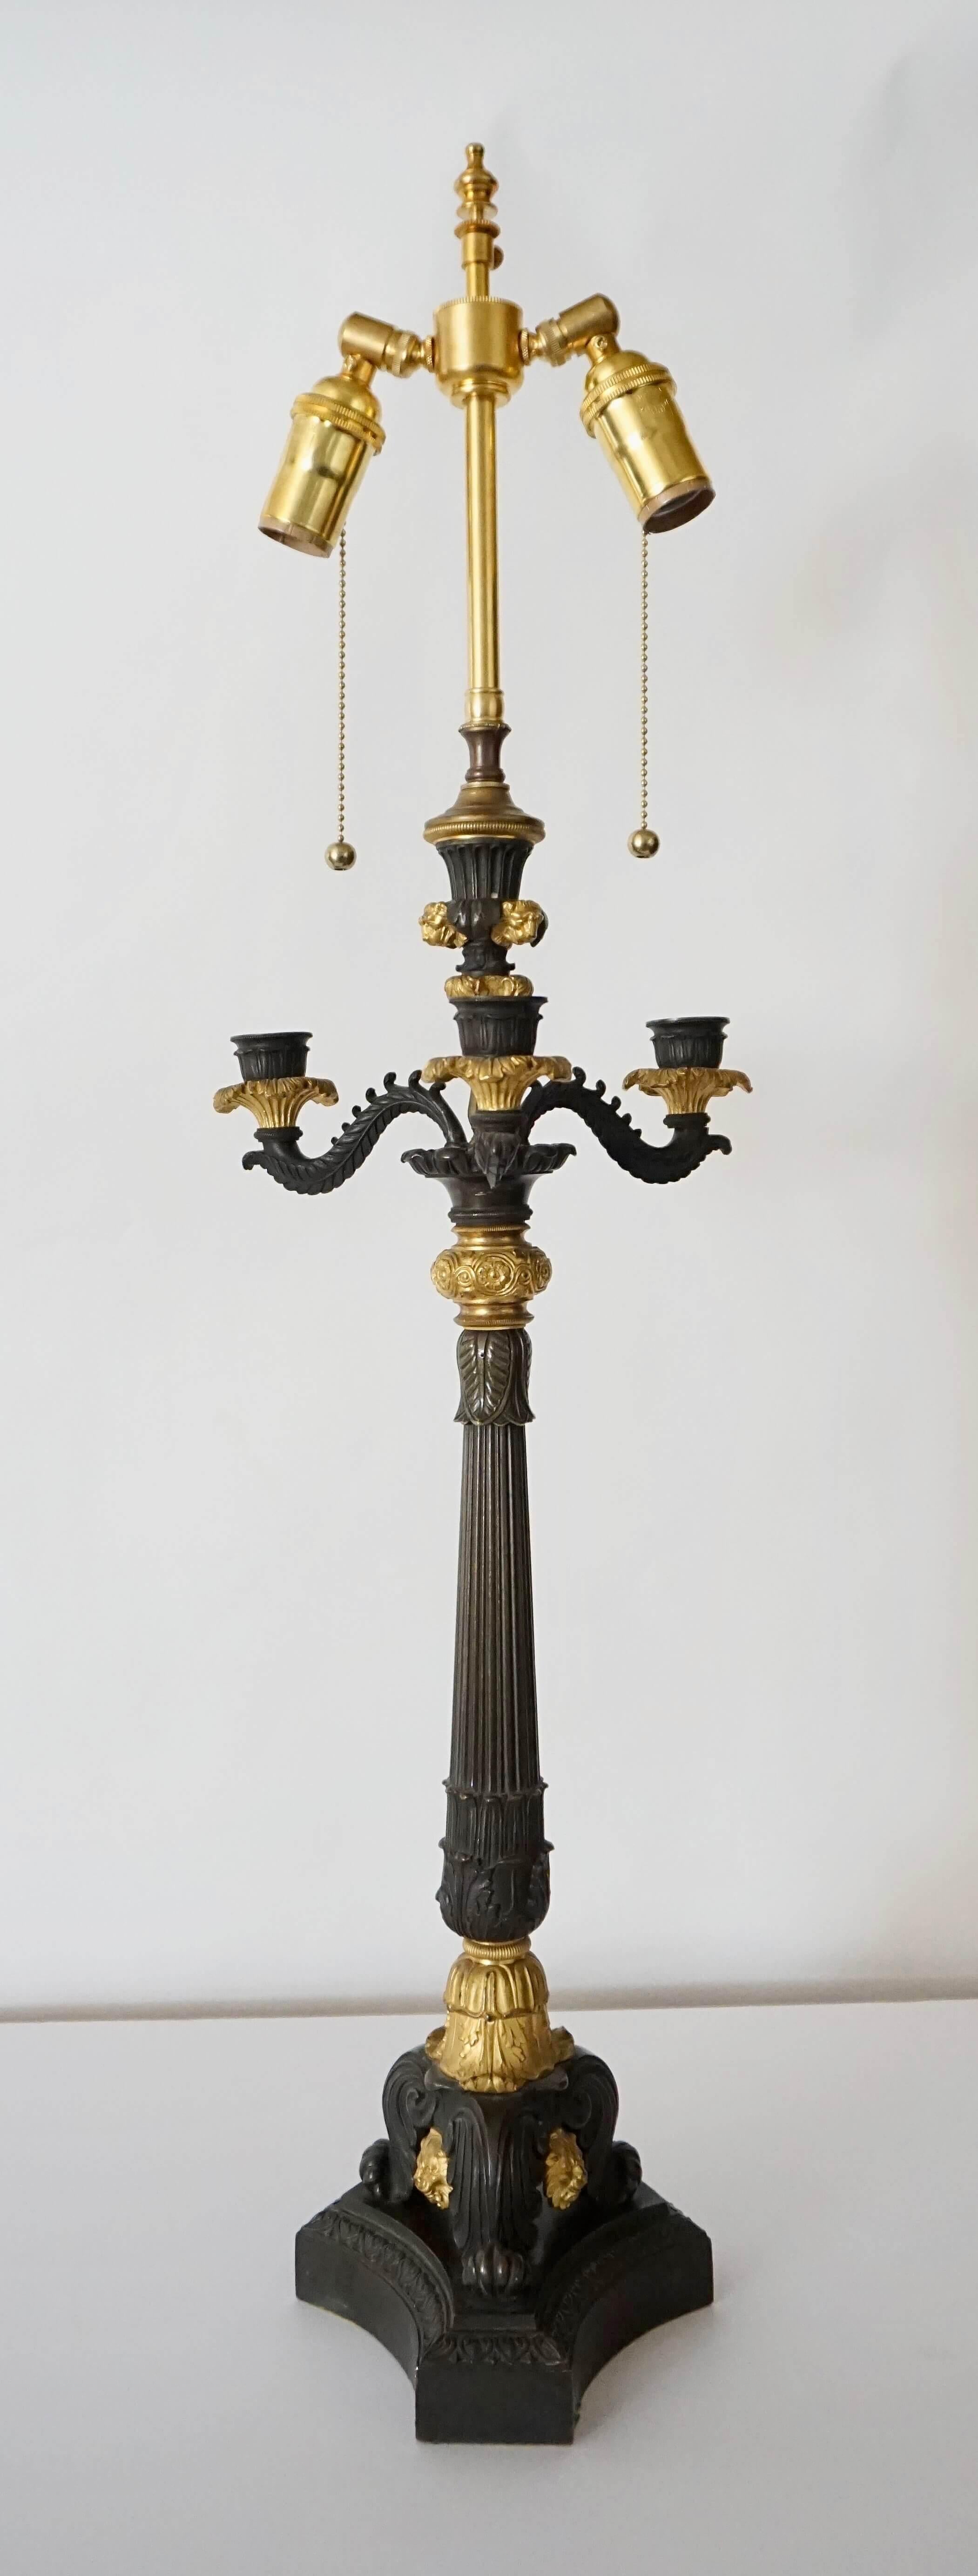 A circa 1825 neoclassical English Regency candelabra converted to electricity having solid patinated and ormolu bronze body with acanthus, foliate, lambs tongue, and lions head motifs; the three scrolling candle arms atop reeded shaft on tripart